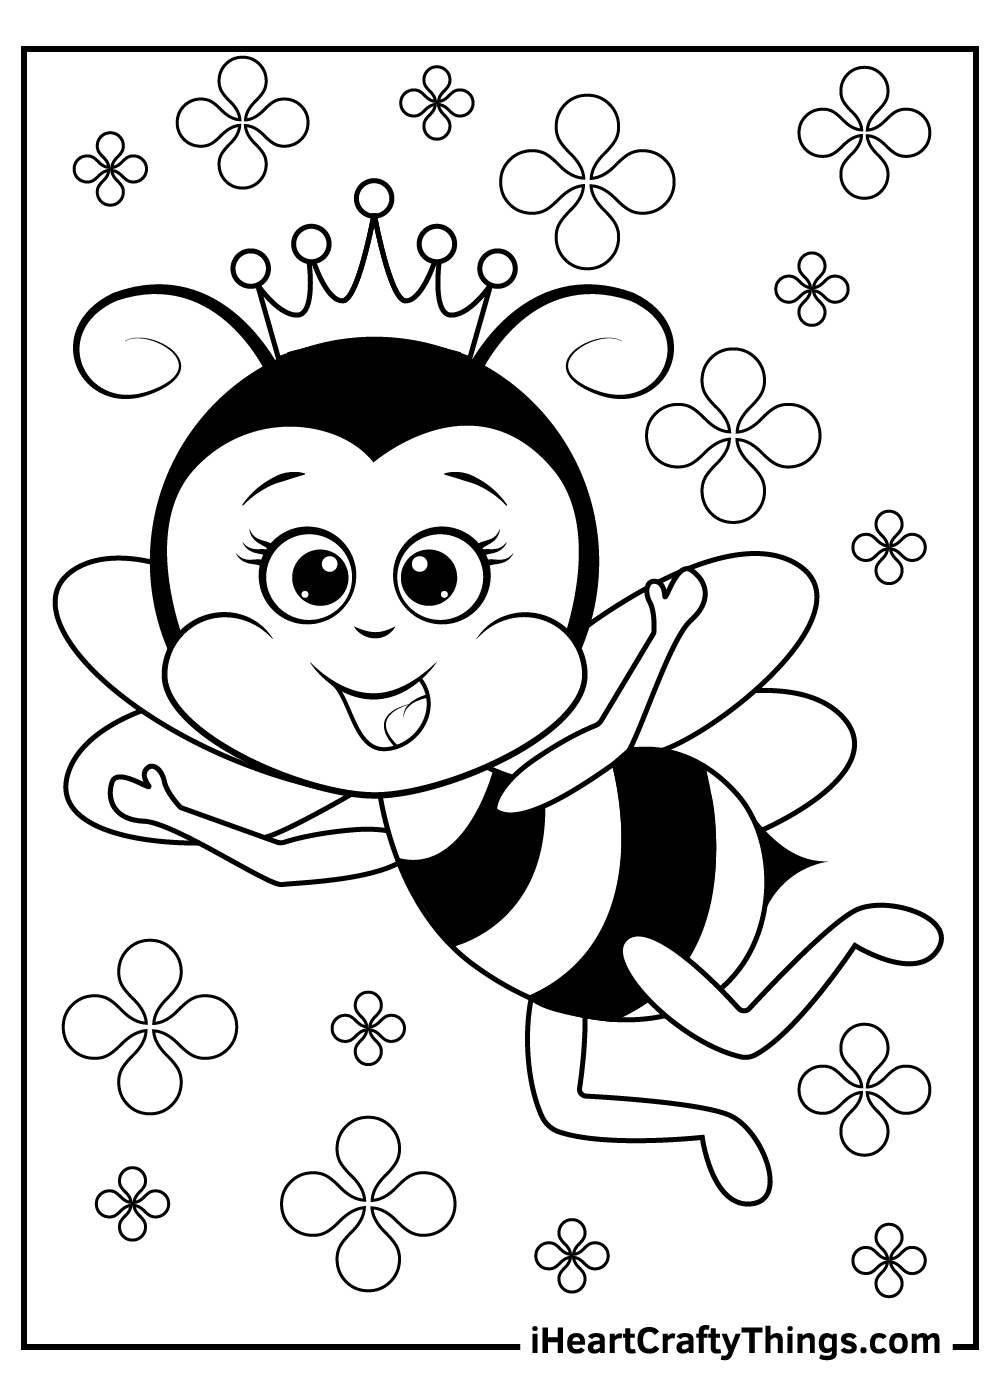 Bee Coloring Pages Updated 20